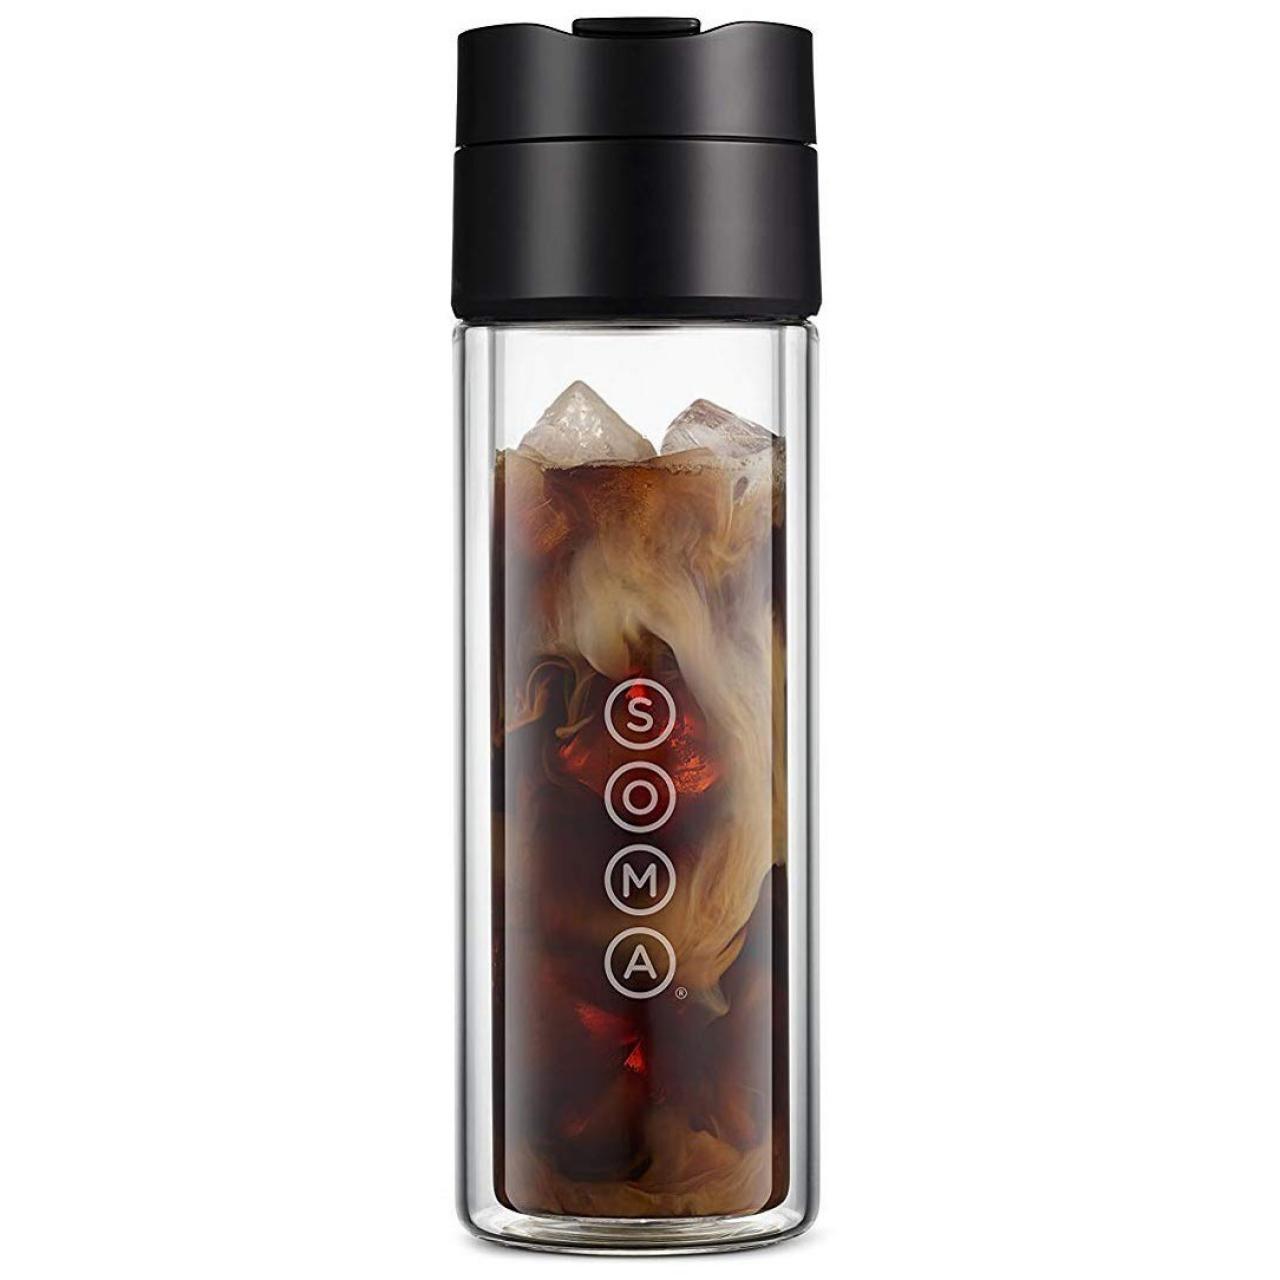 https://food.fnr.sndimg.com/content/dam/images/food/products/2019/3/8/rx_soma-water-bottle-amazon-4x3.jpg.rend.hgtvcom.1280.1280.suffix/1552083979611.jpeg